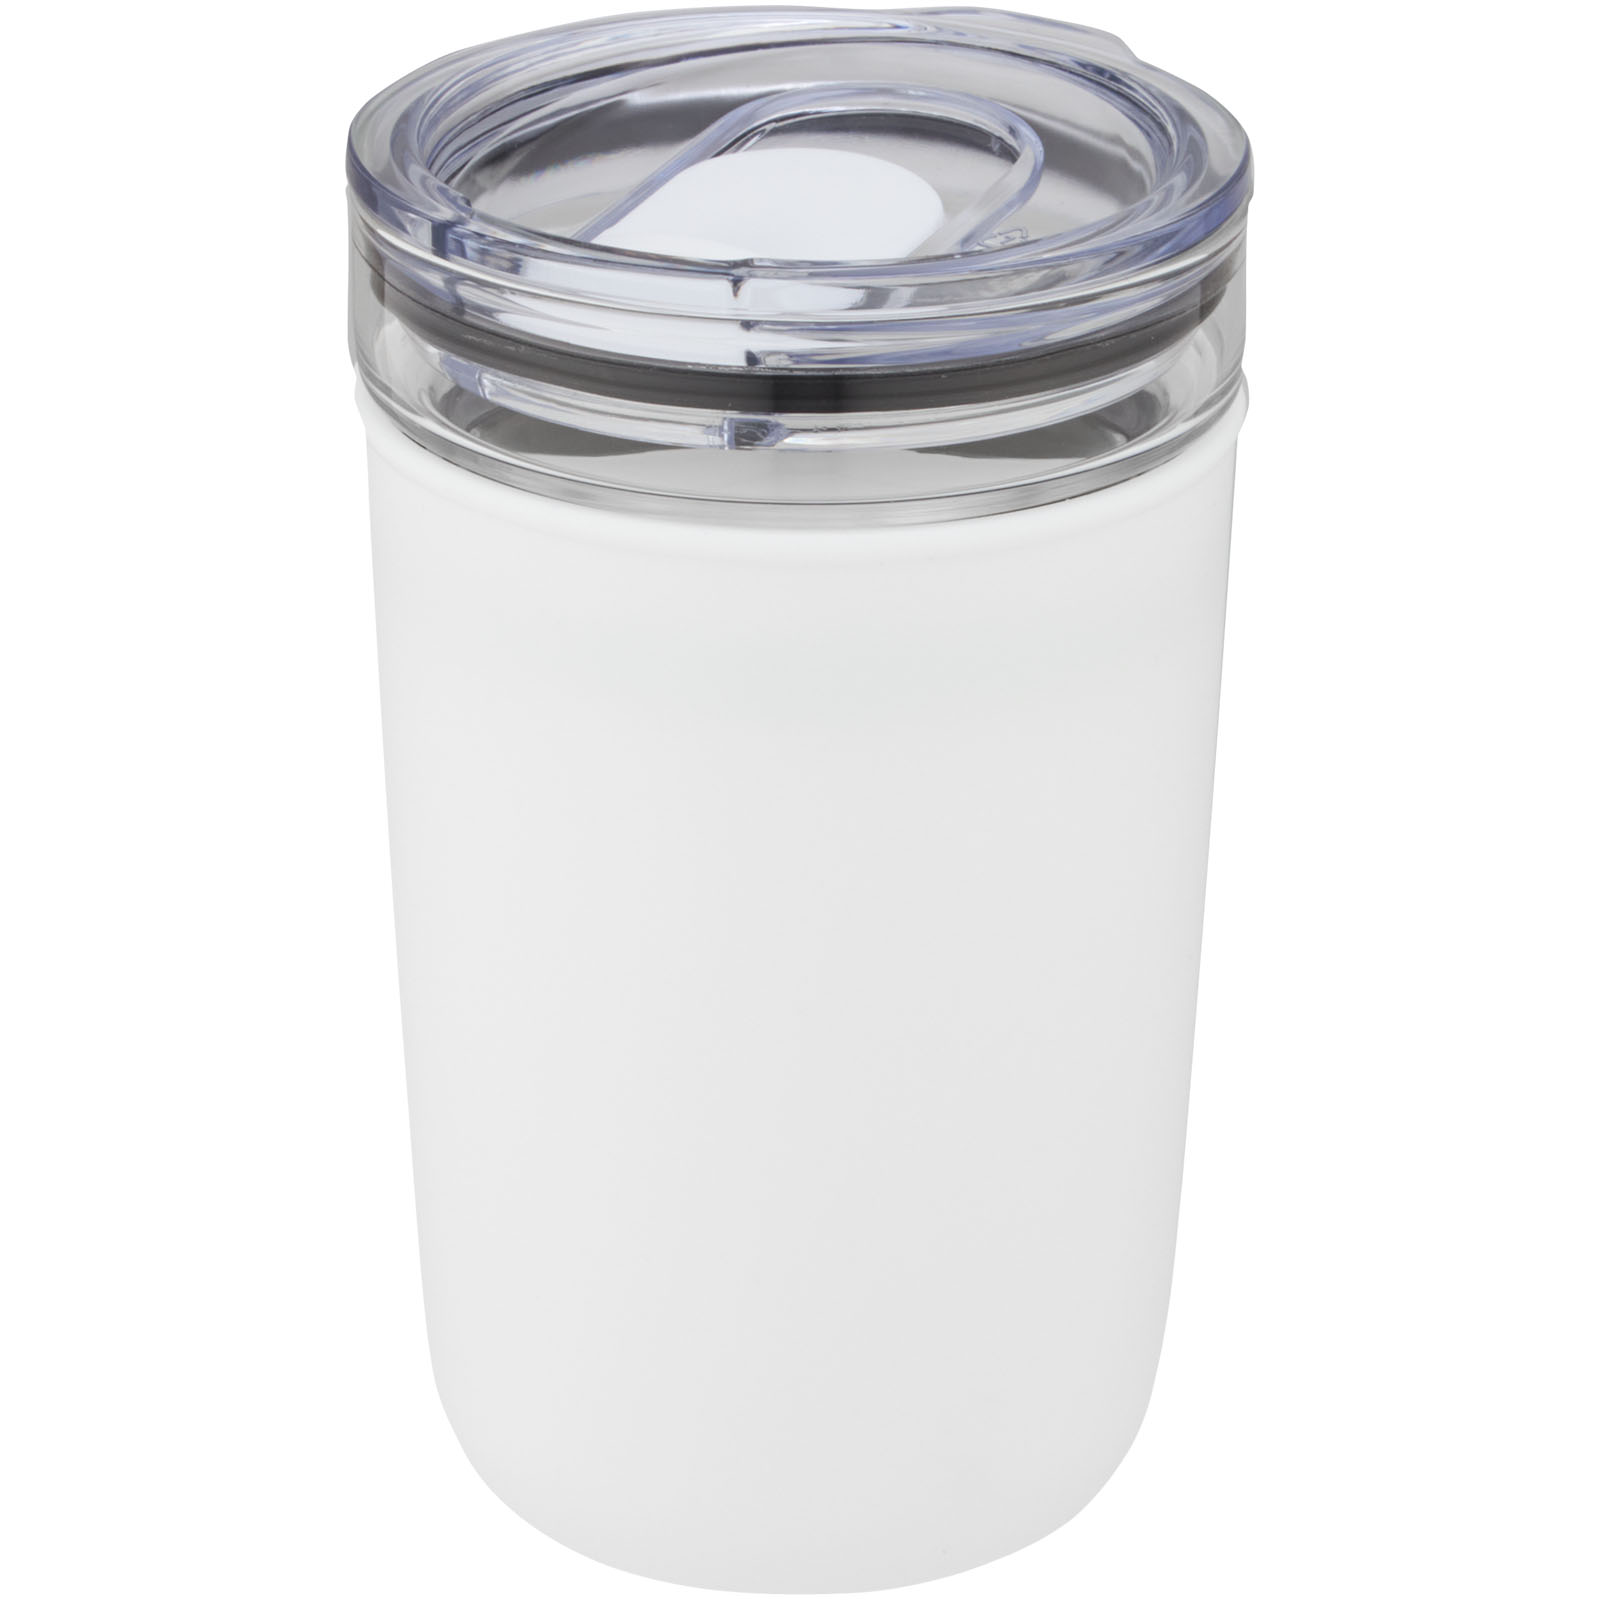 Travel mugs - Bello 420 ml glass tumbler with recycled plastic outer wall